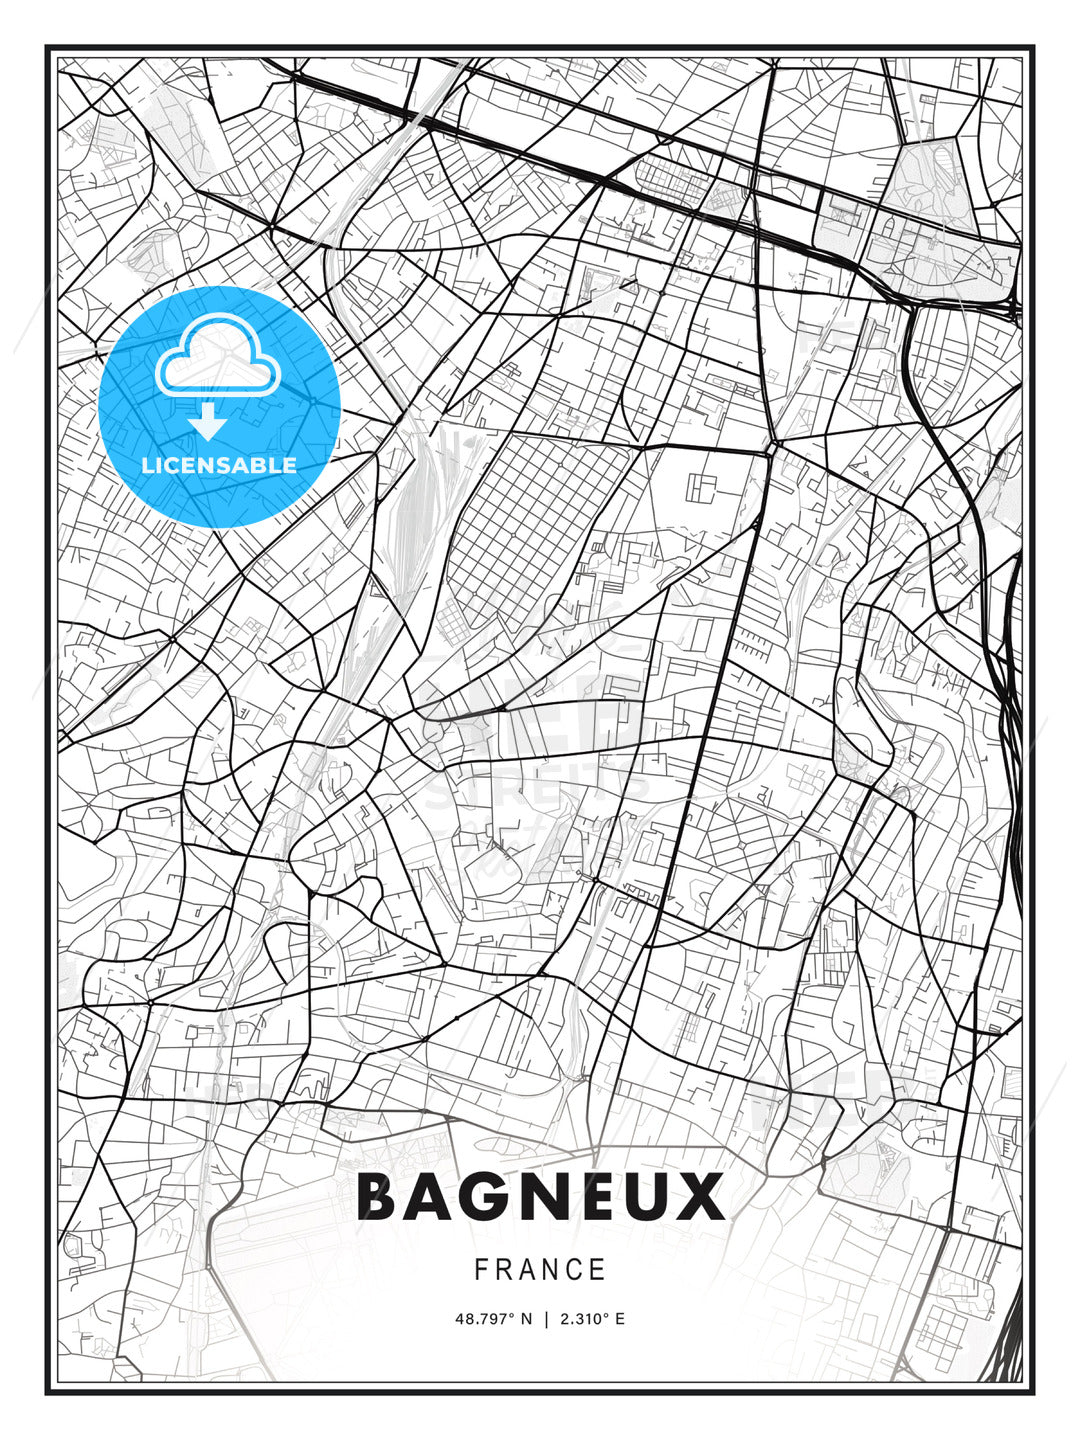 Bagneux, France, Modern Print Template in Various Formats - HEBSTREITS Sketches